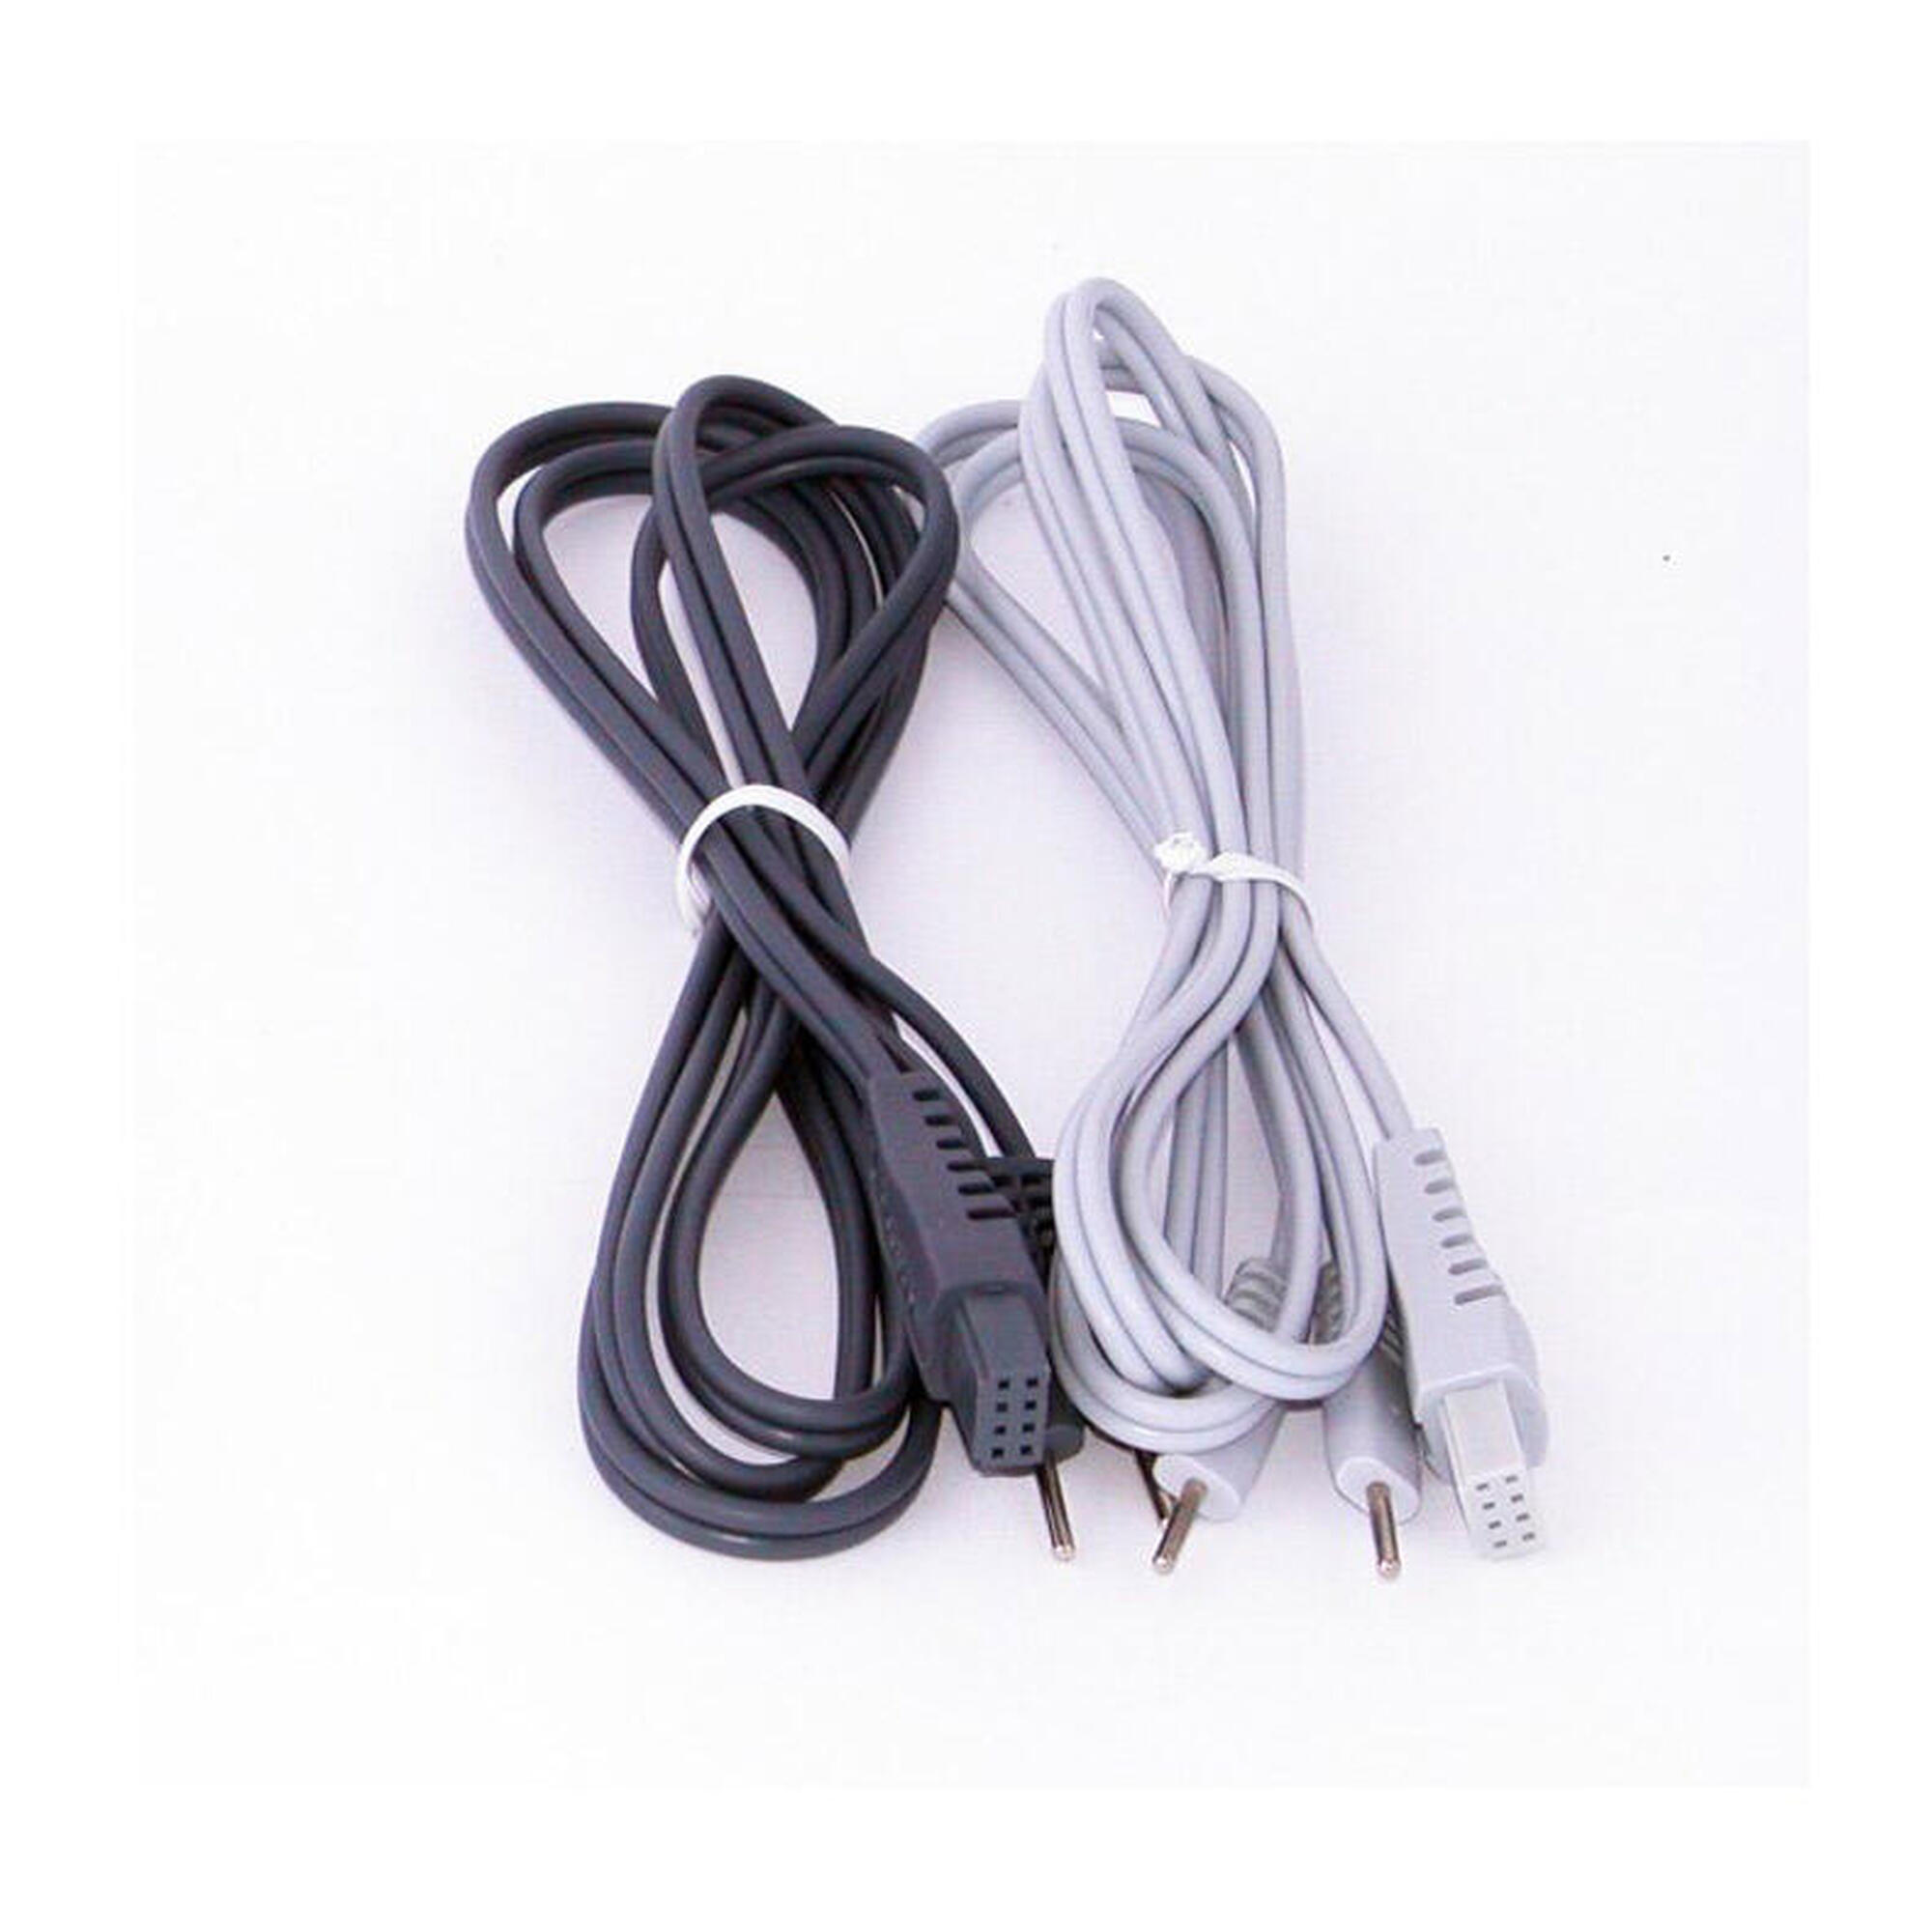 Globus Kit Spare Cables for Micro Currents (2 pieces)